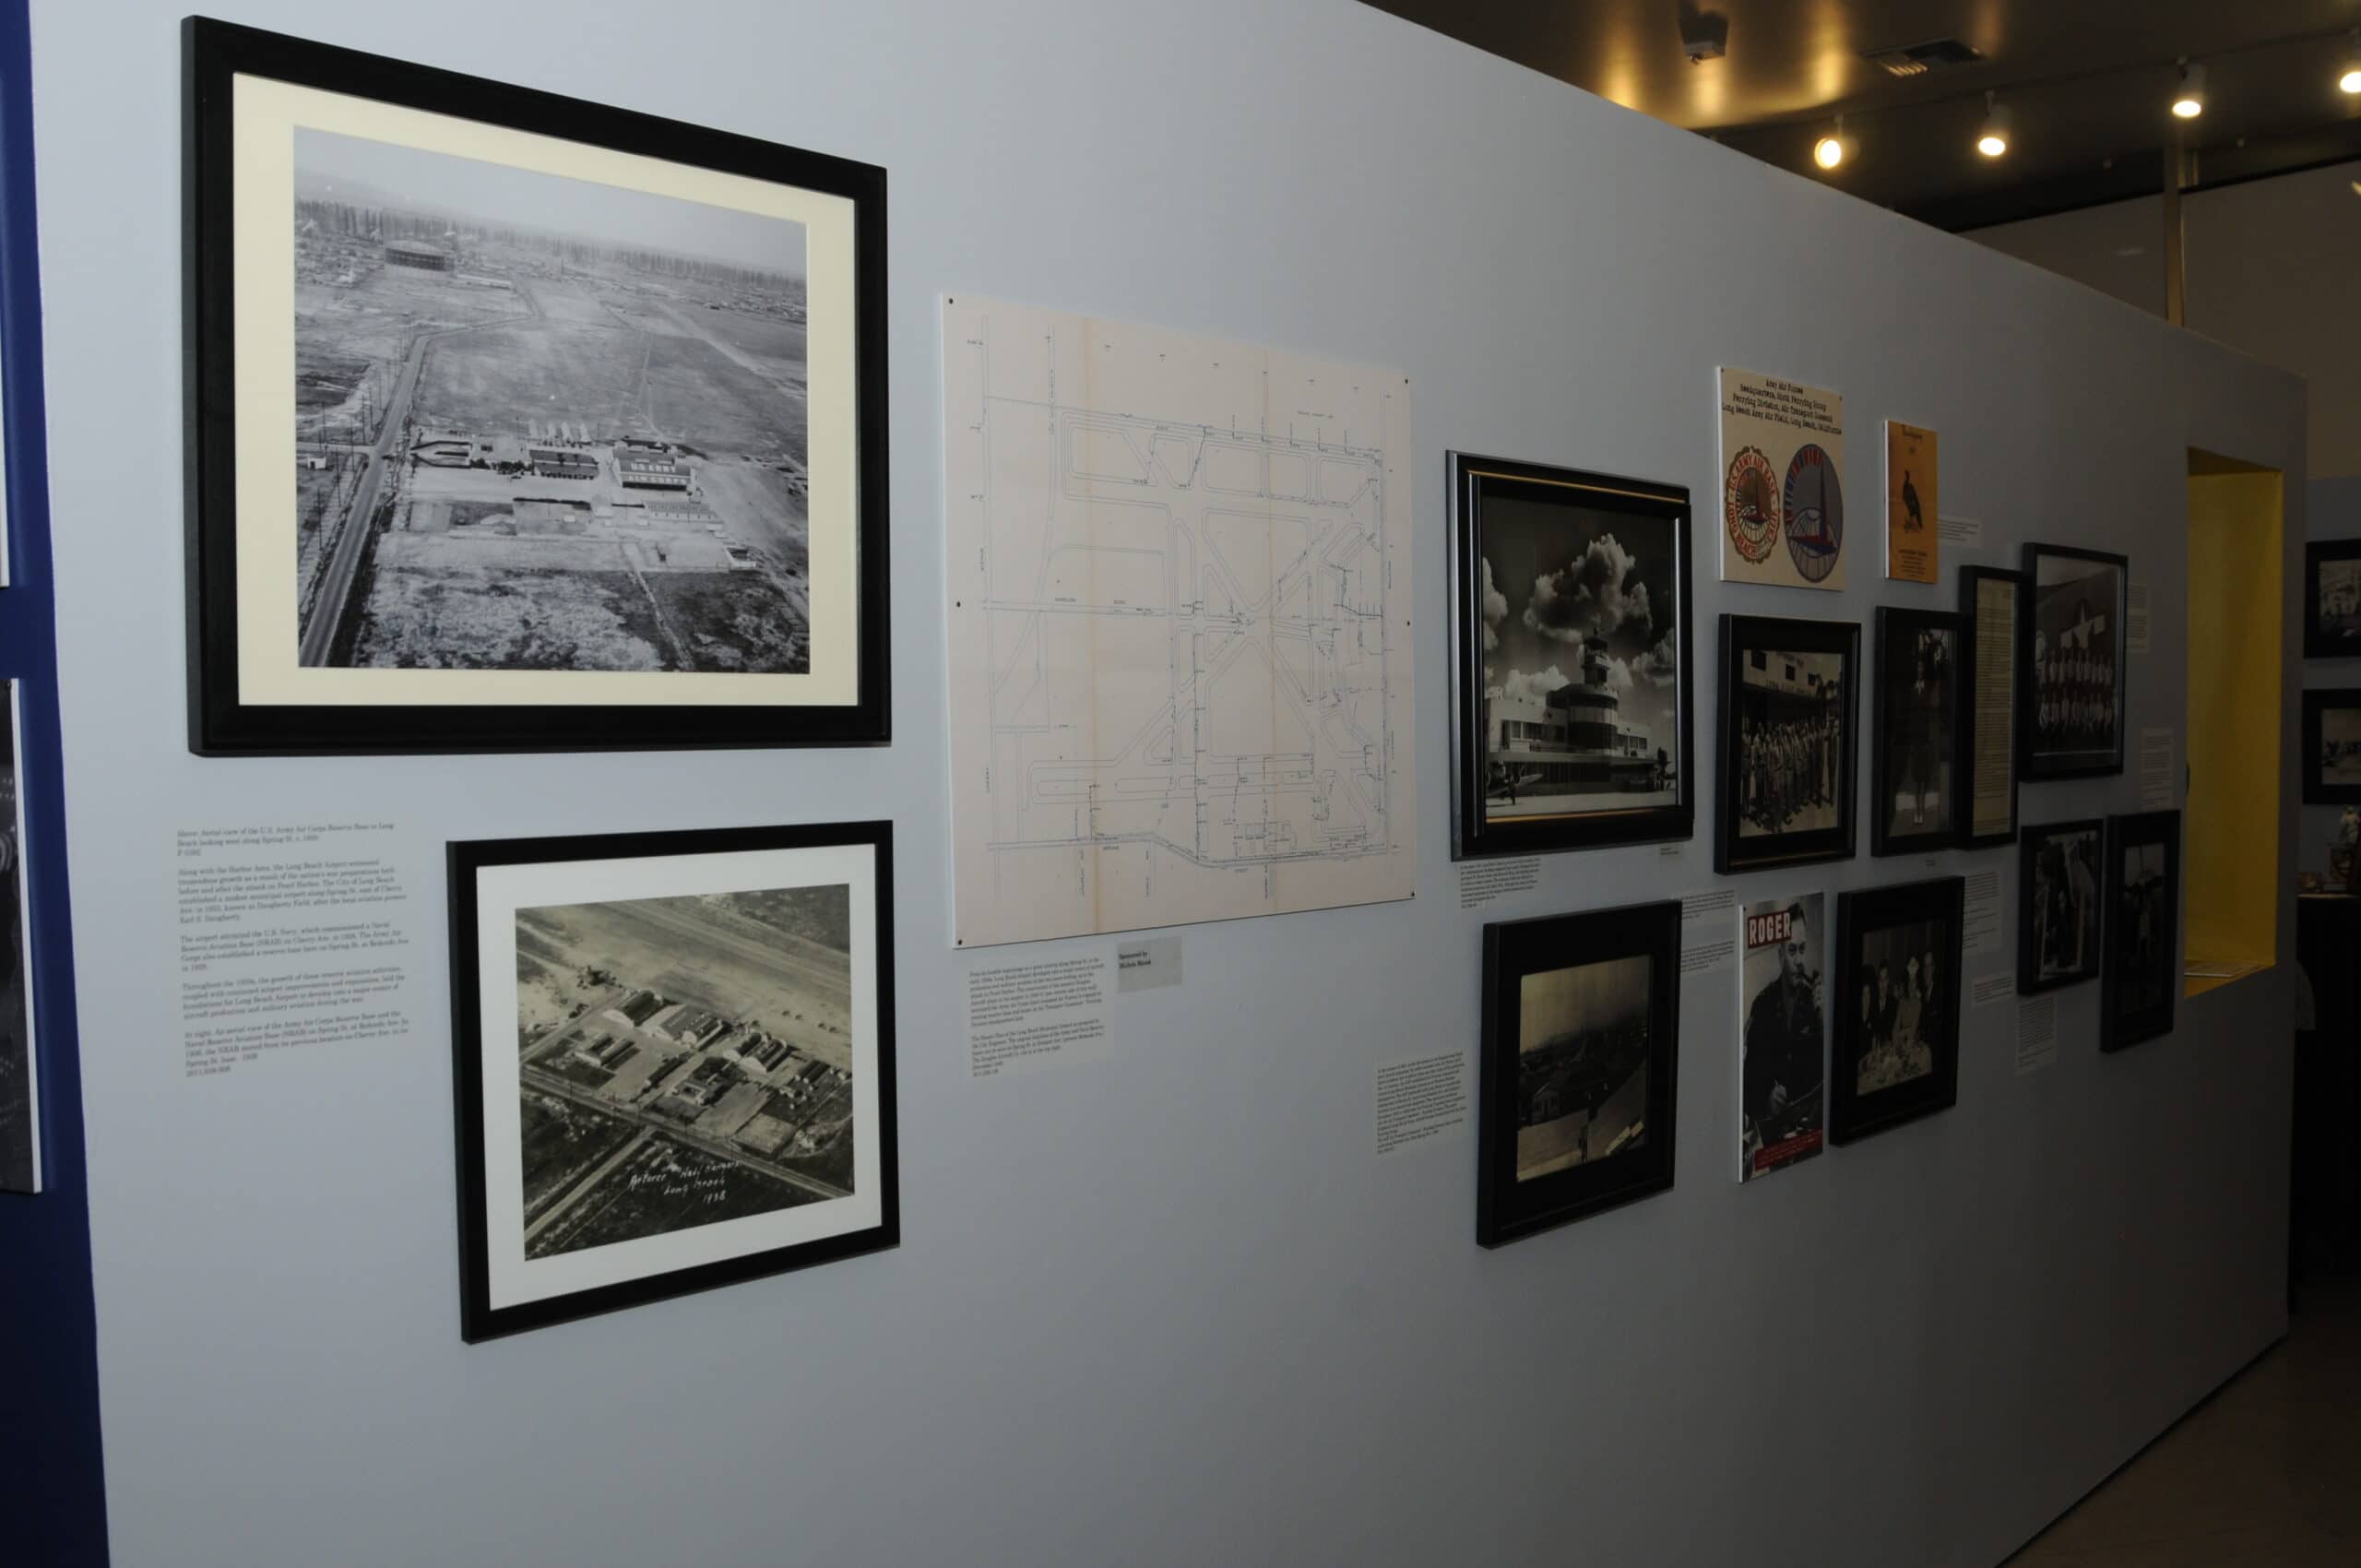 Historical society pearl harbor opening reception vintage photos and information